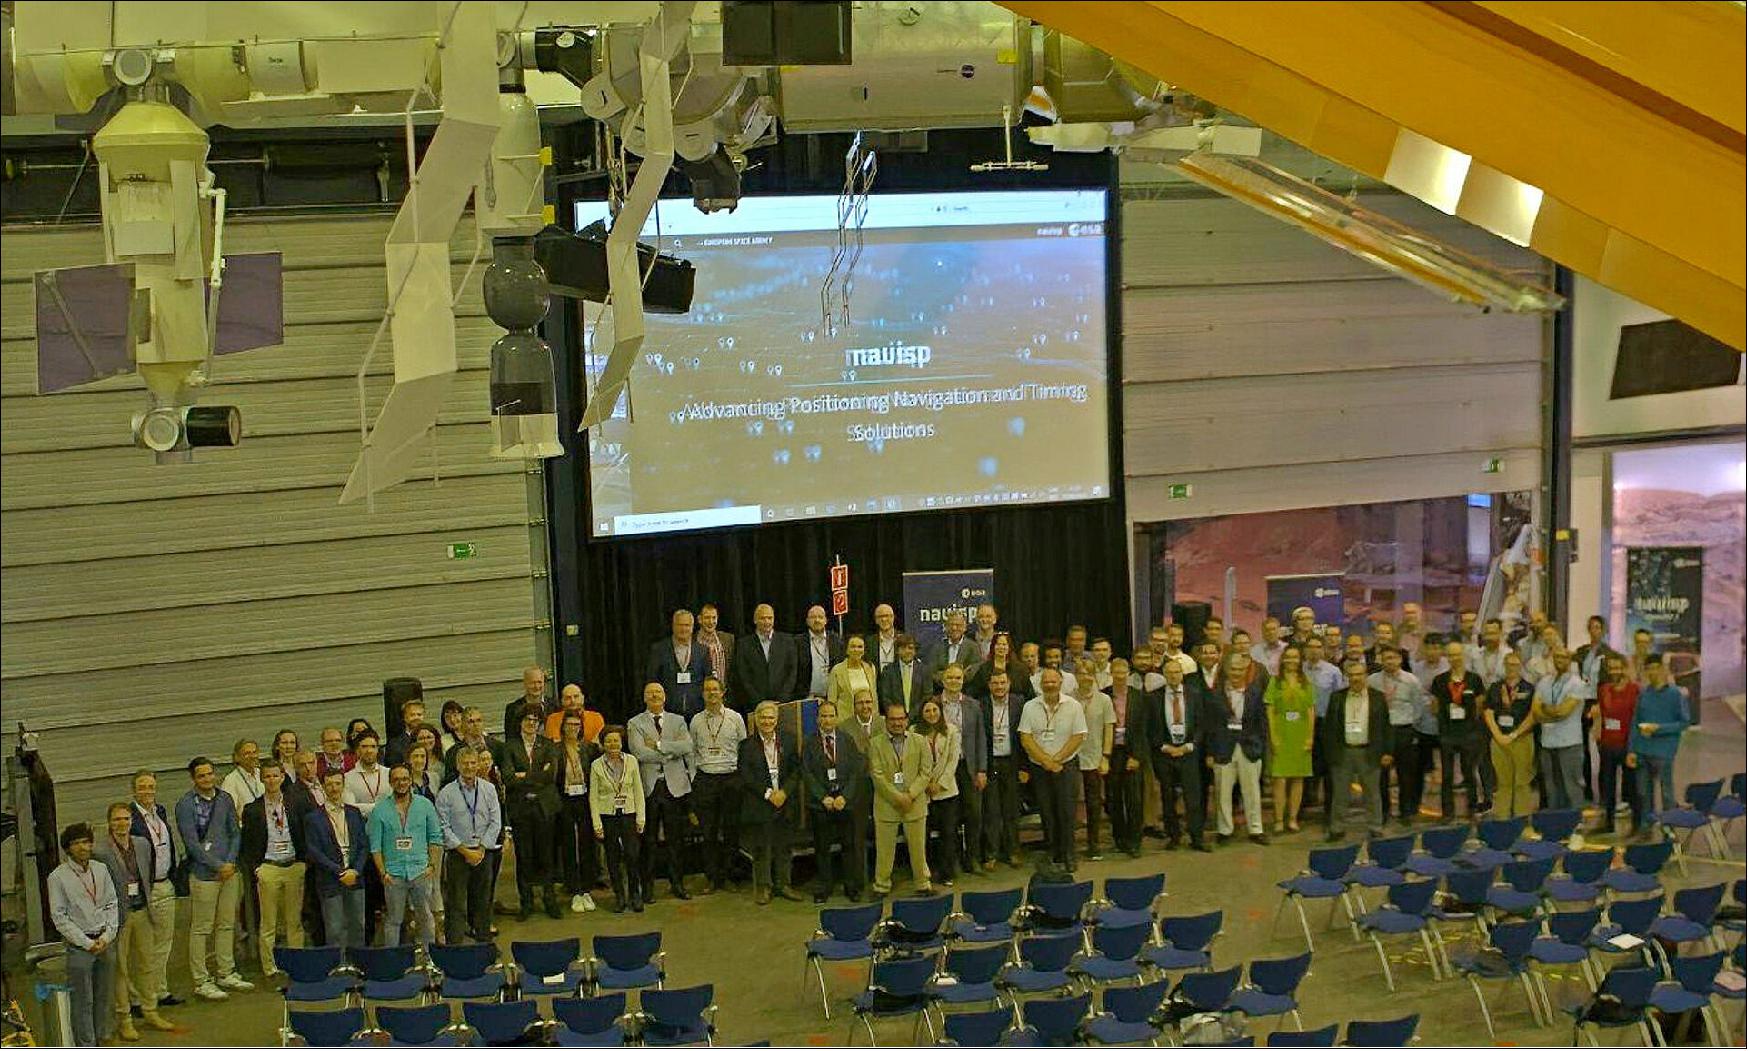 Figure 10: Europe’s leading companies and research institutes working on positioning, navigation and timing technologies met at ESA’s technical heart in the Netherlands on 16-17 June for this year’s NAVISP Industry Days, devoted to the latest developments in the Agency’s Navigation Innovation and Support Programme (image credit: ESA)